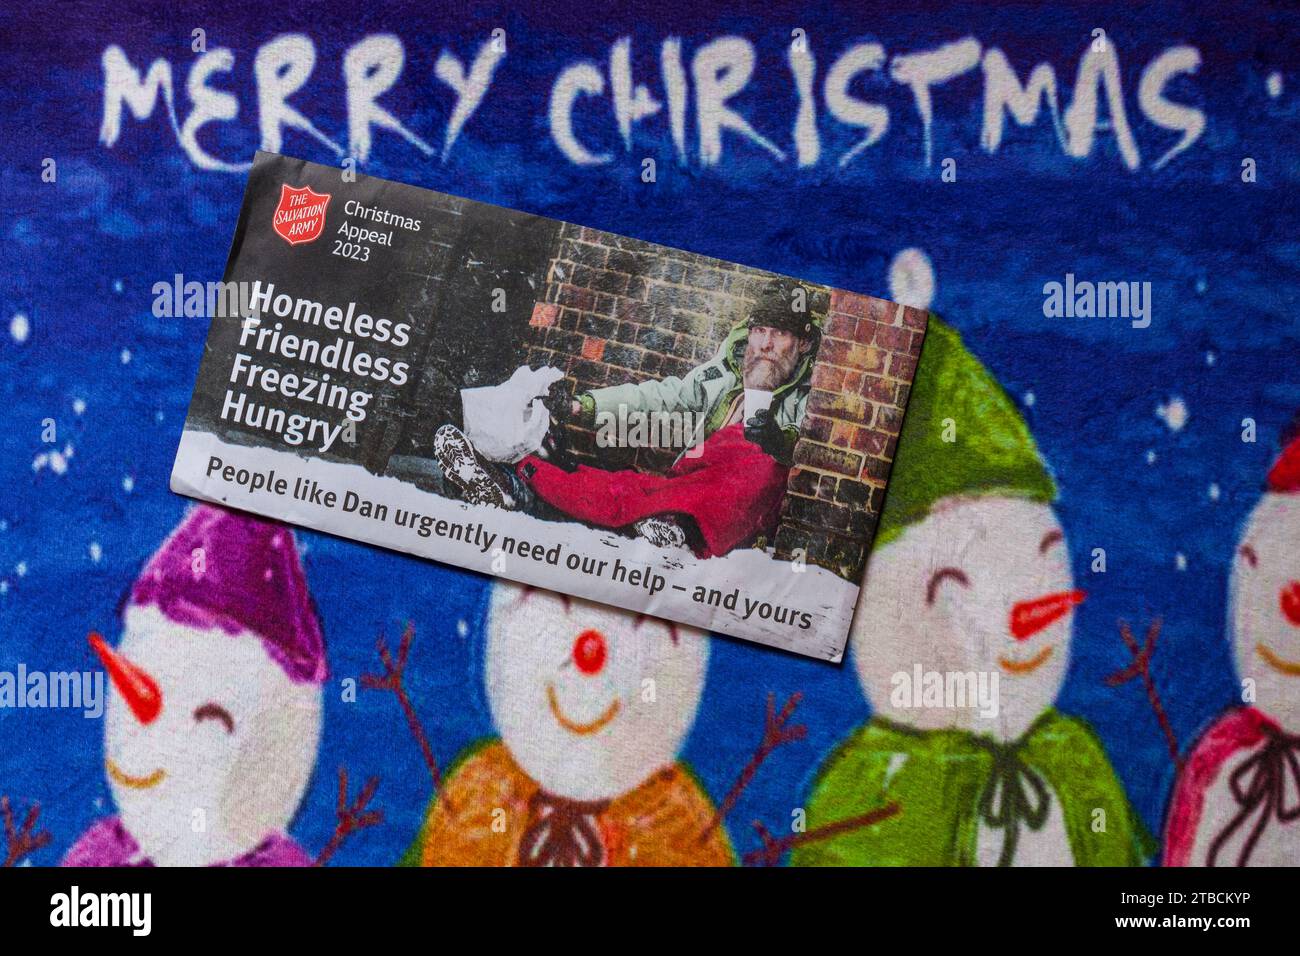 Post mail on Merry Christmas doormat - Christmas appeal 2023 from the Salvation Army, homeless friendless freezing hungry Stock Photo